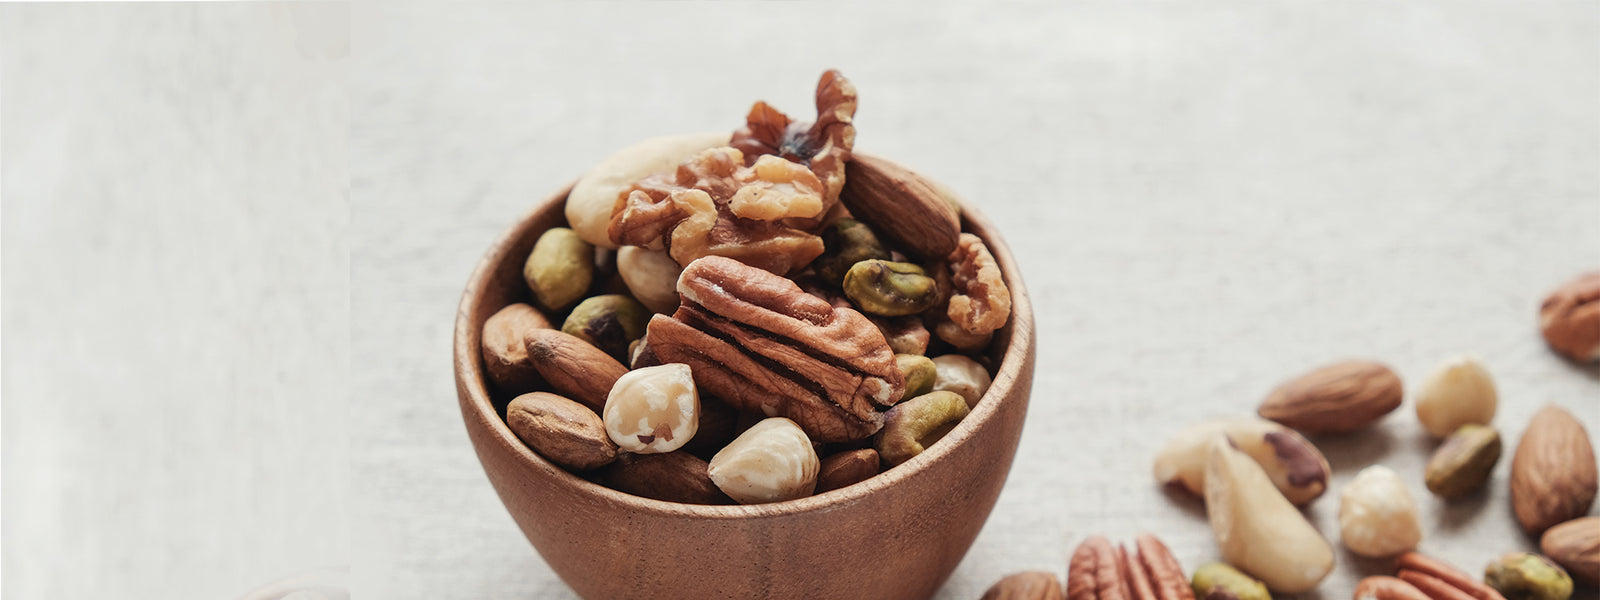 Nuts & Seeds: Preserve Your Memory - The Simple Health & Wellness Blog